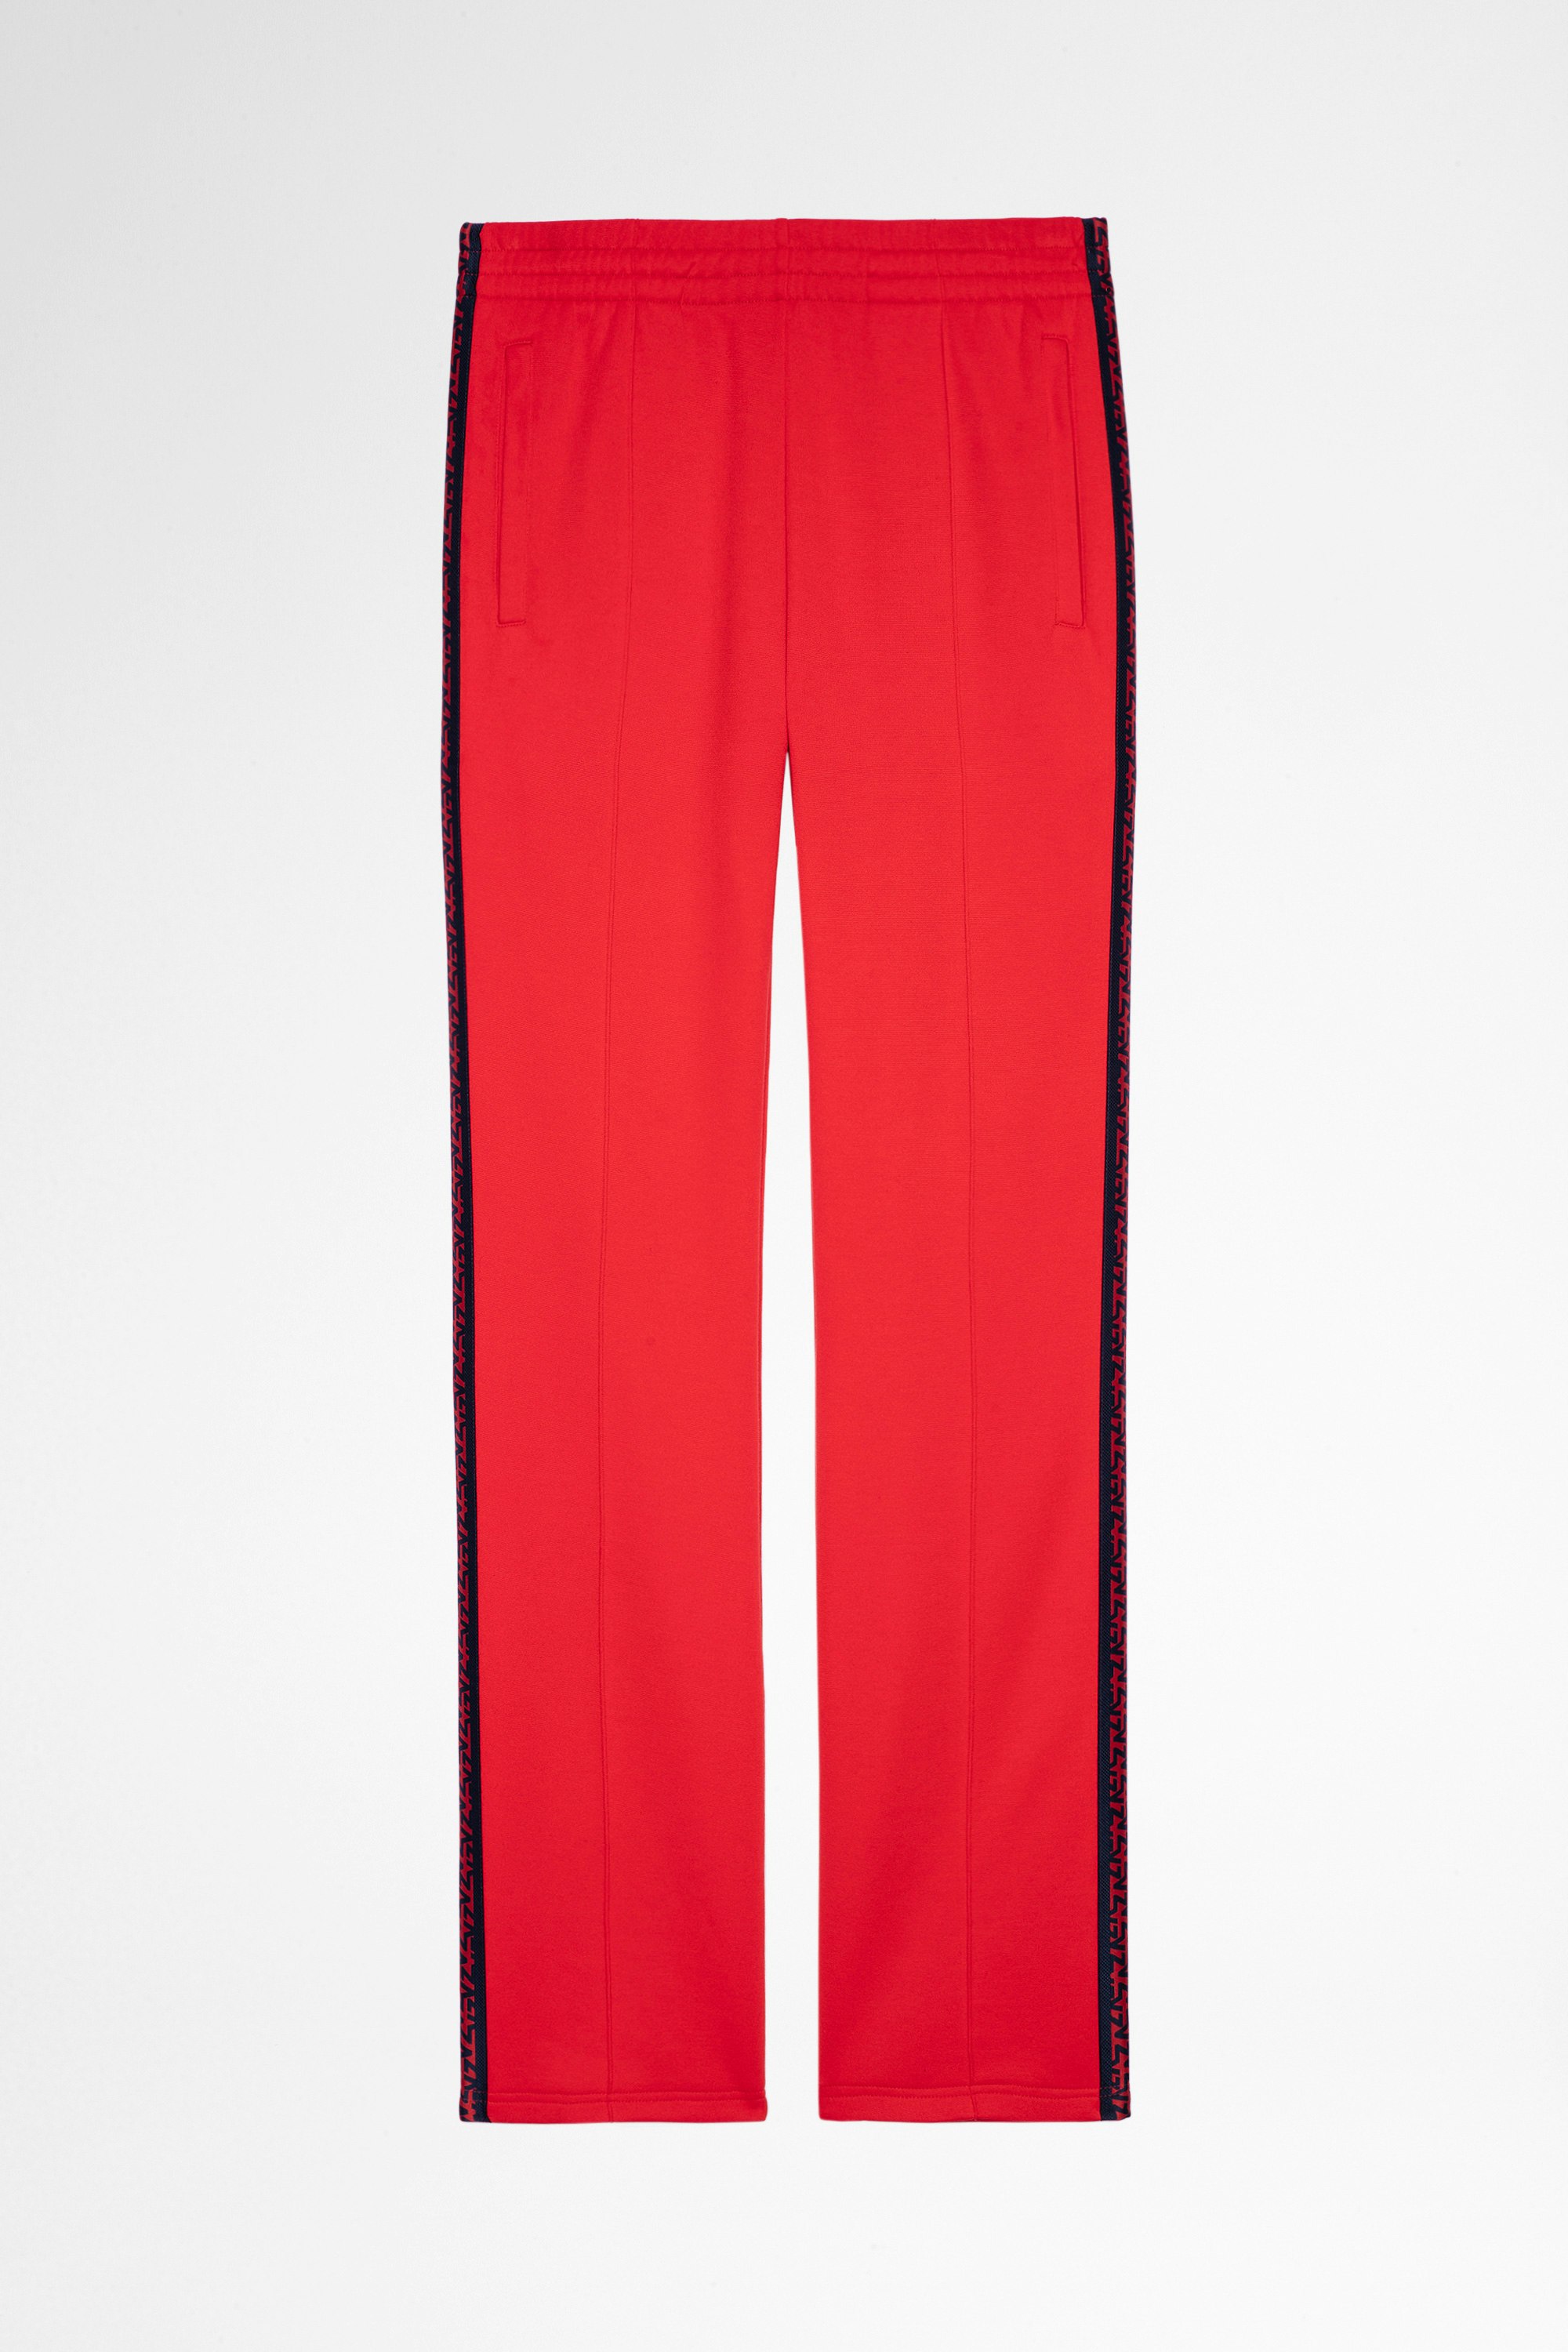 Chillyn Pants Men's red flared pants with side bands. Made with fibers from organic farming.